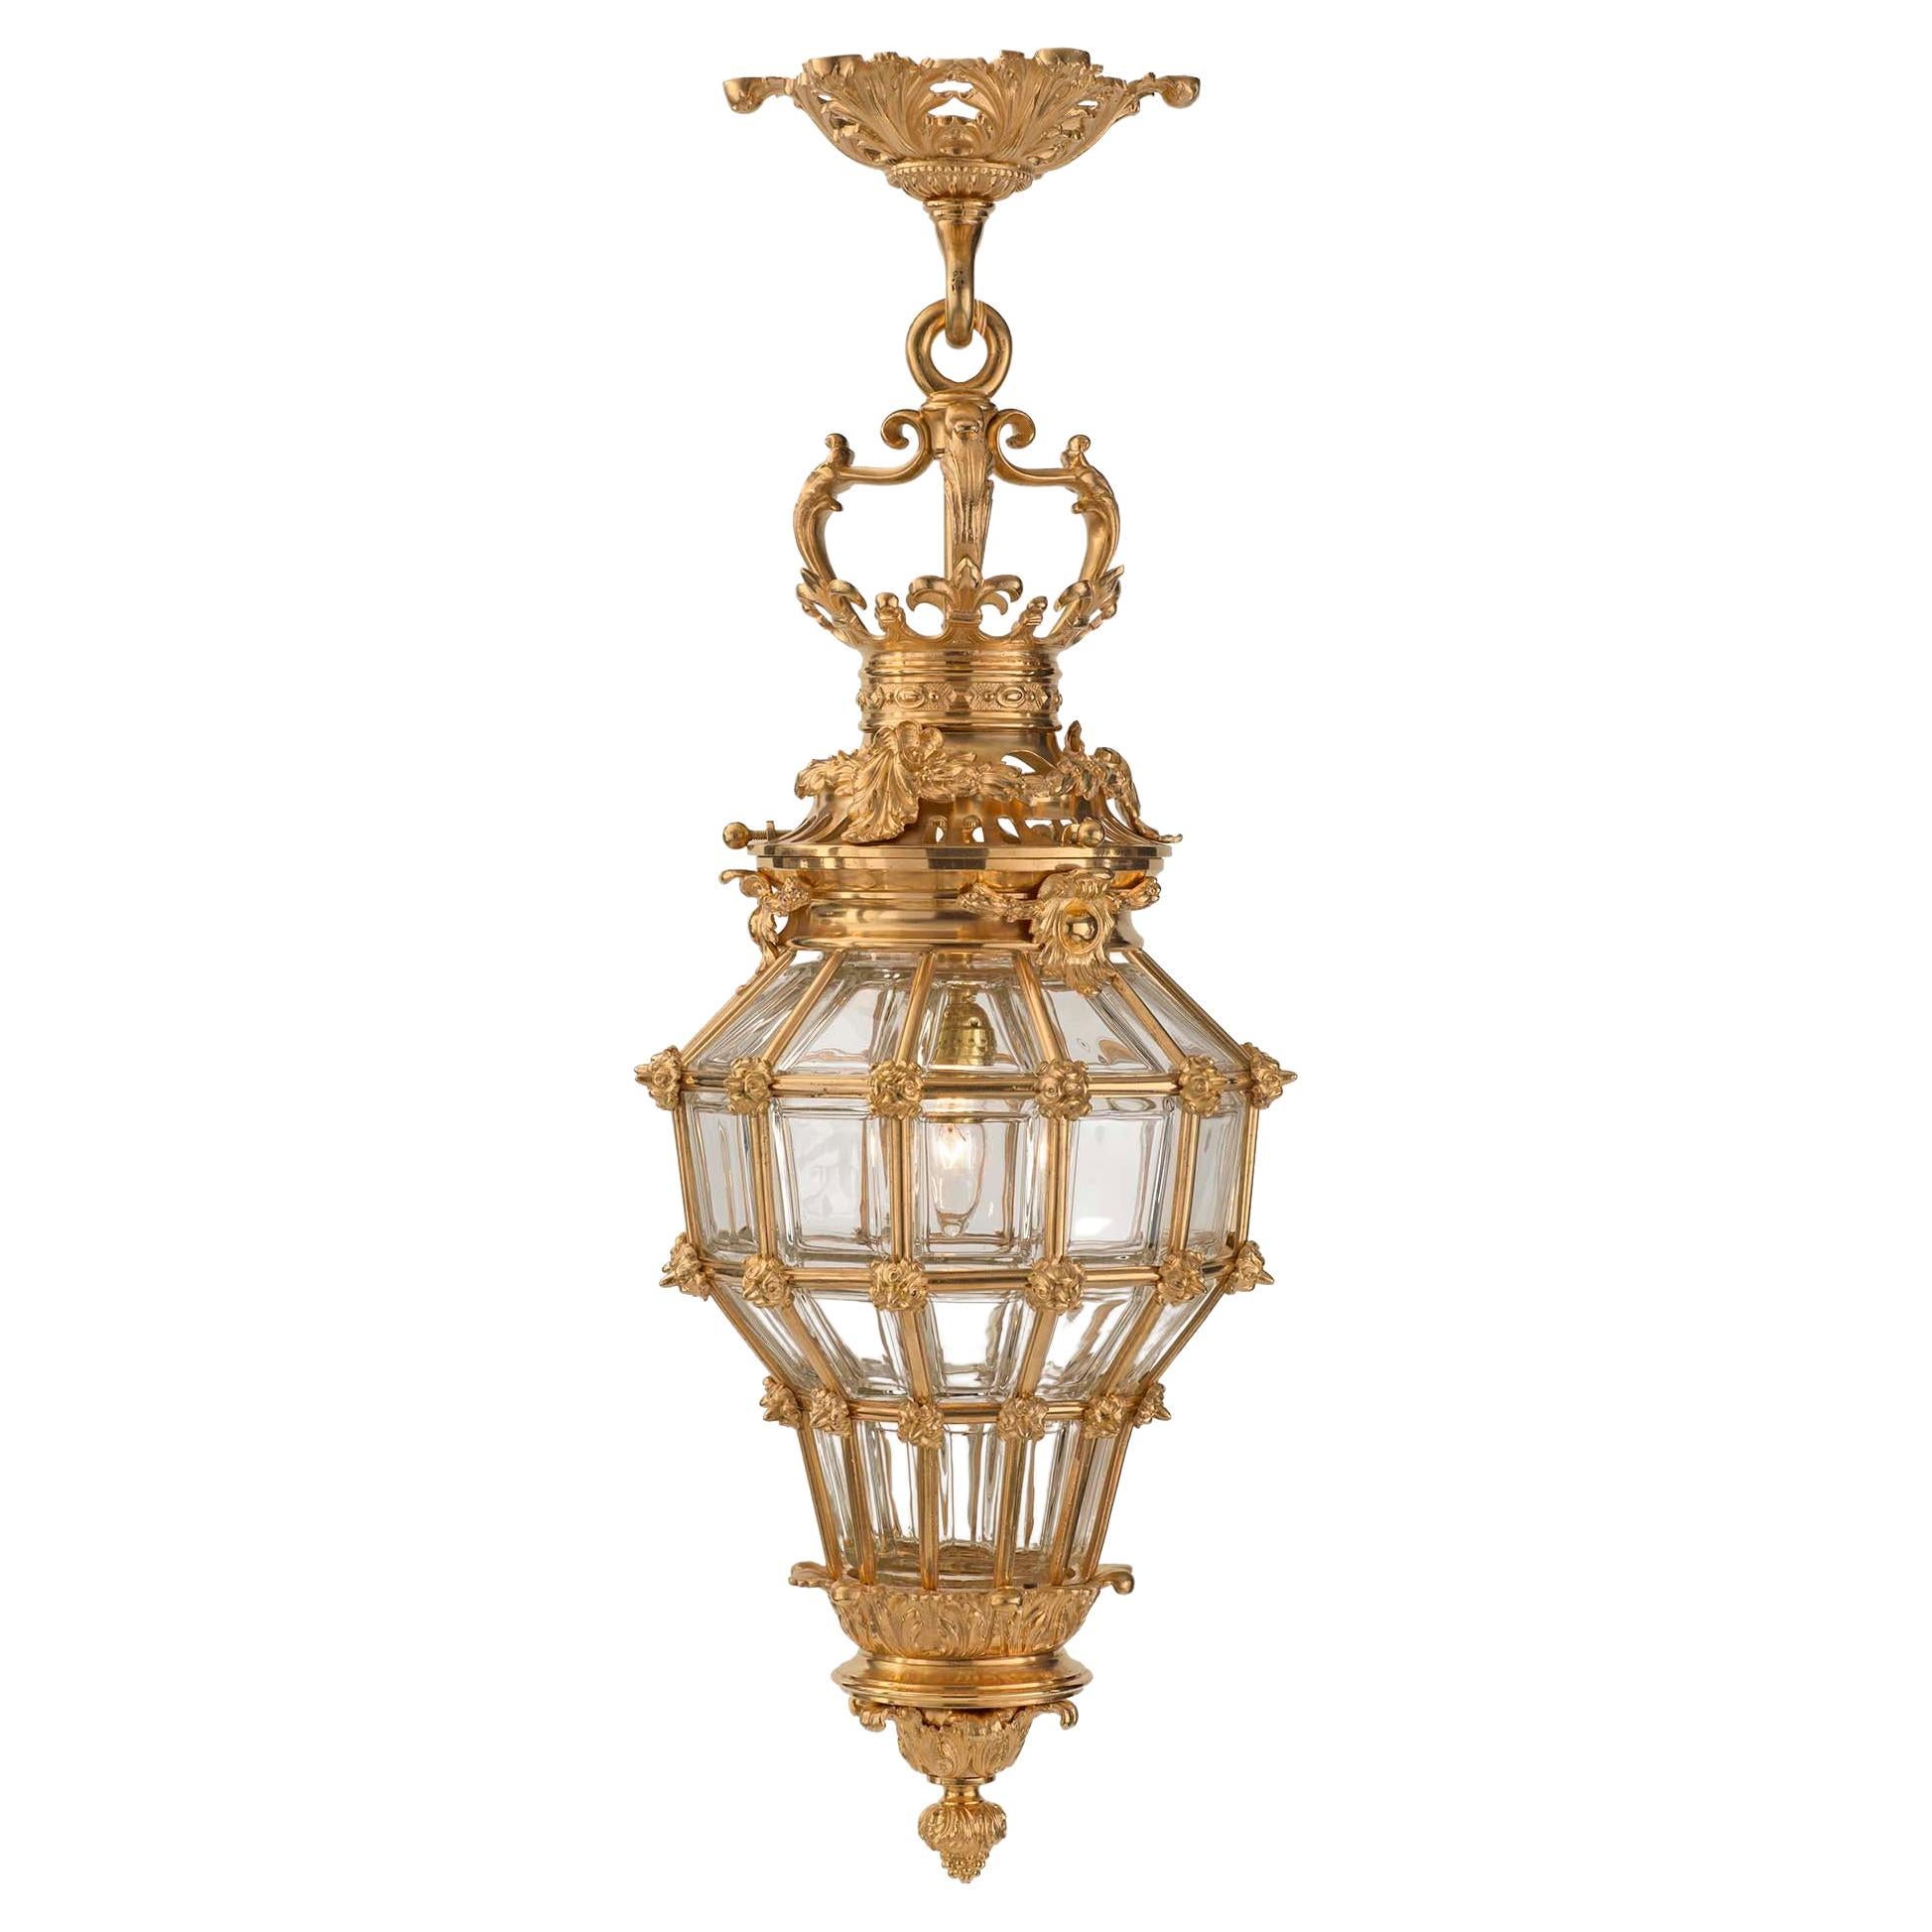 French 19th Century Louis XIV Style Ormolu and Crystal Lantern For Sale